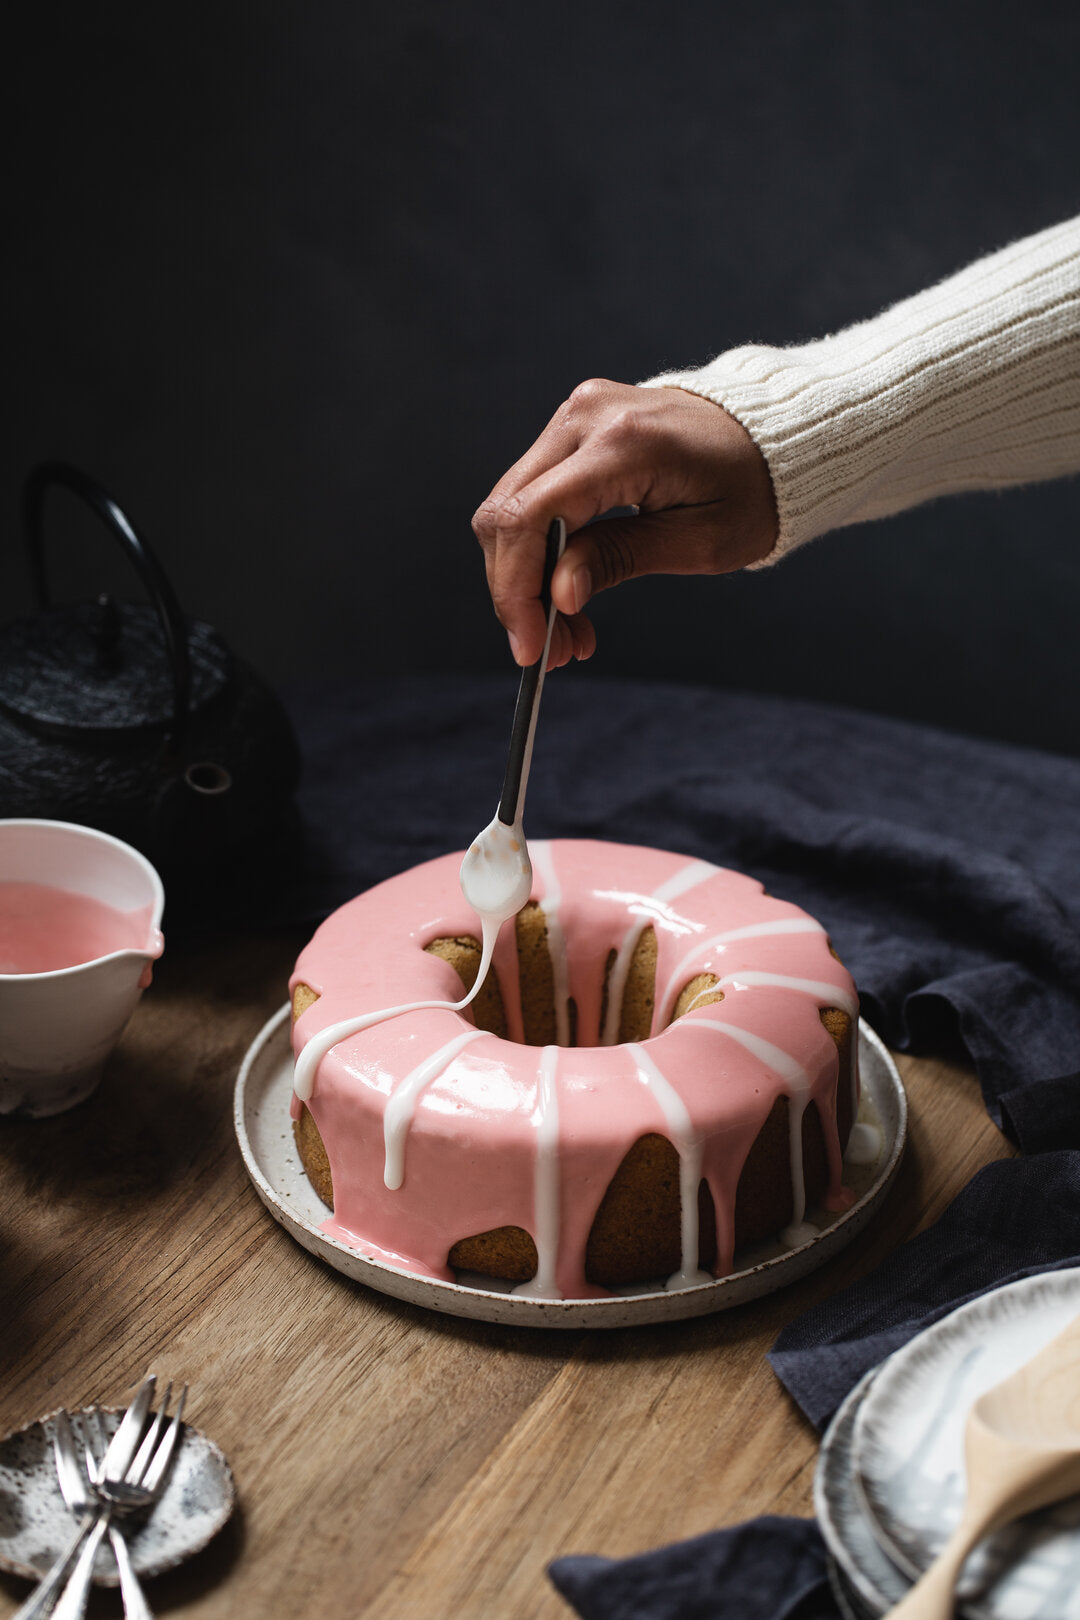 Blood Orange and Earl Grey Bundt Cake with pink and white striped icing.  There is a hand and arm in the top right corner holding a spoon that is dripping with white icing.